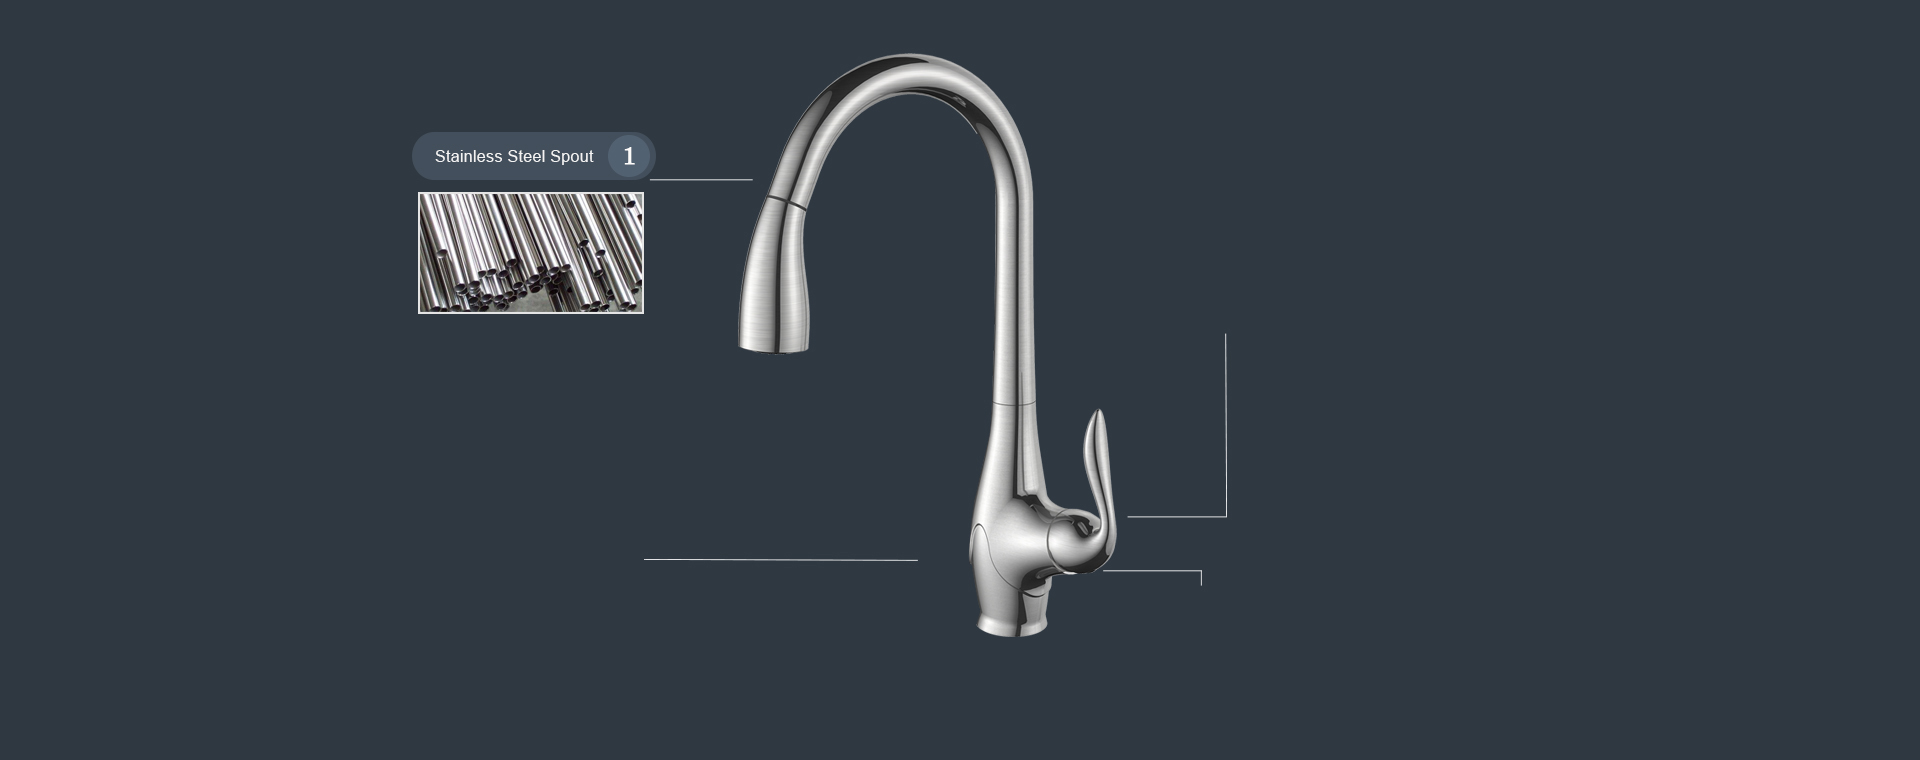 best pull down kitchen faucet